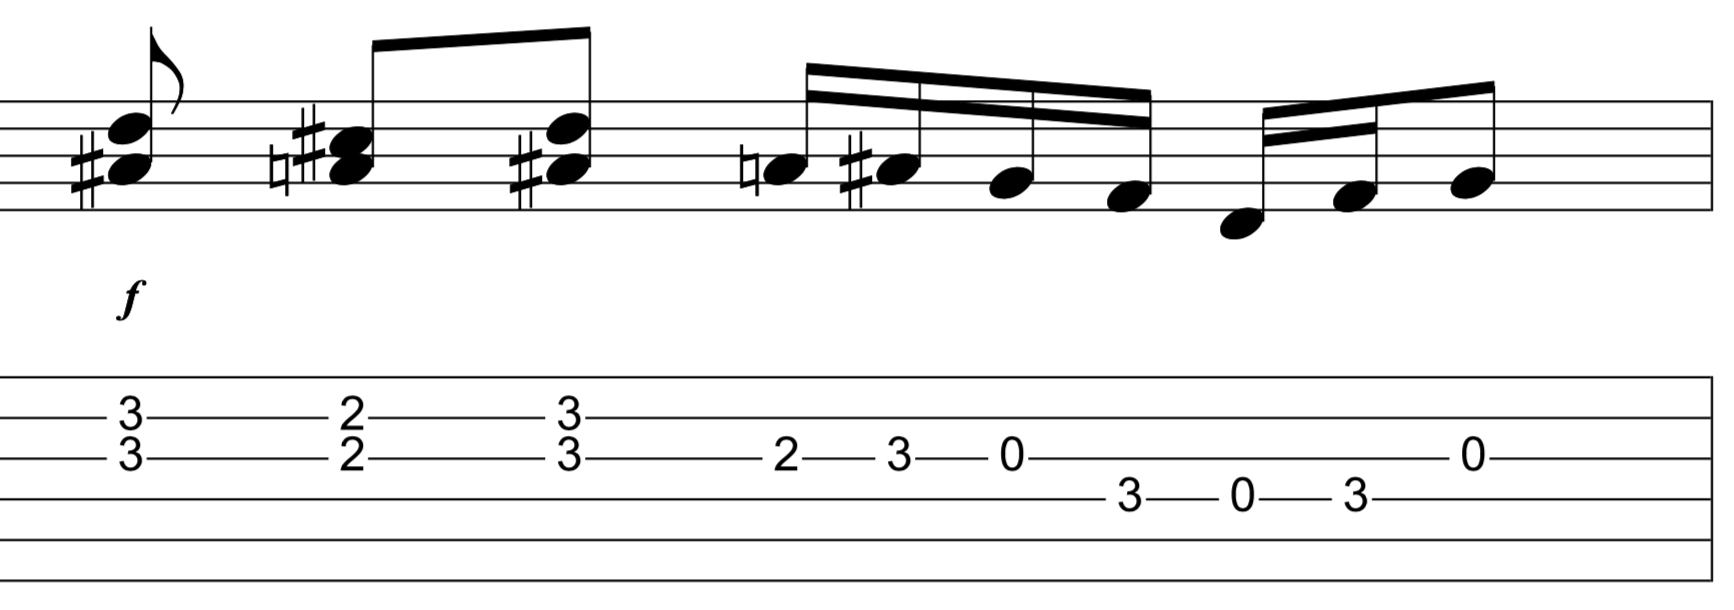 Led Zeppelin's "Trampled Under Foot" will improve your picking technique